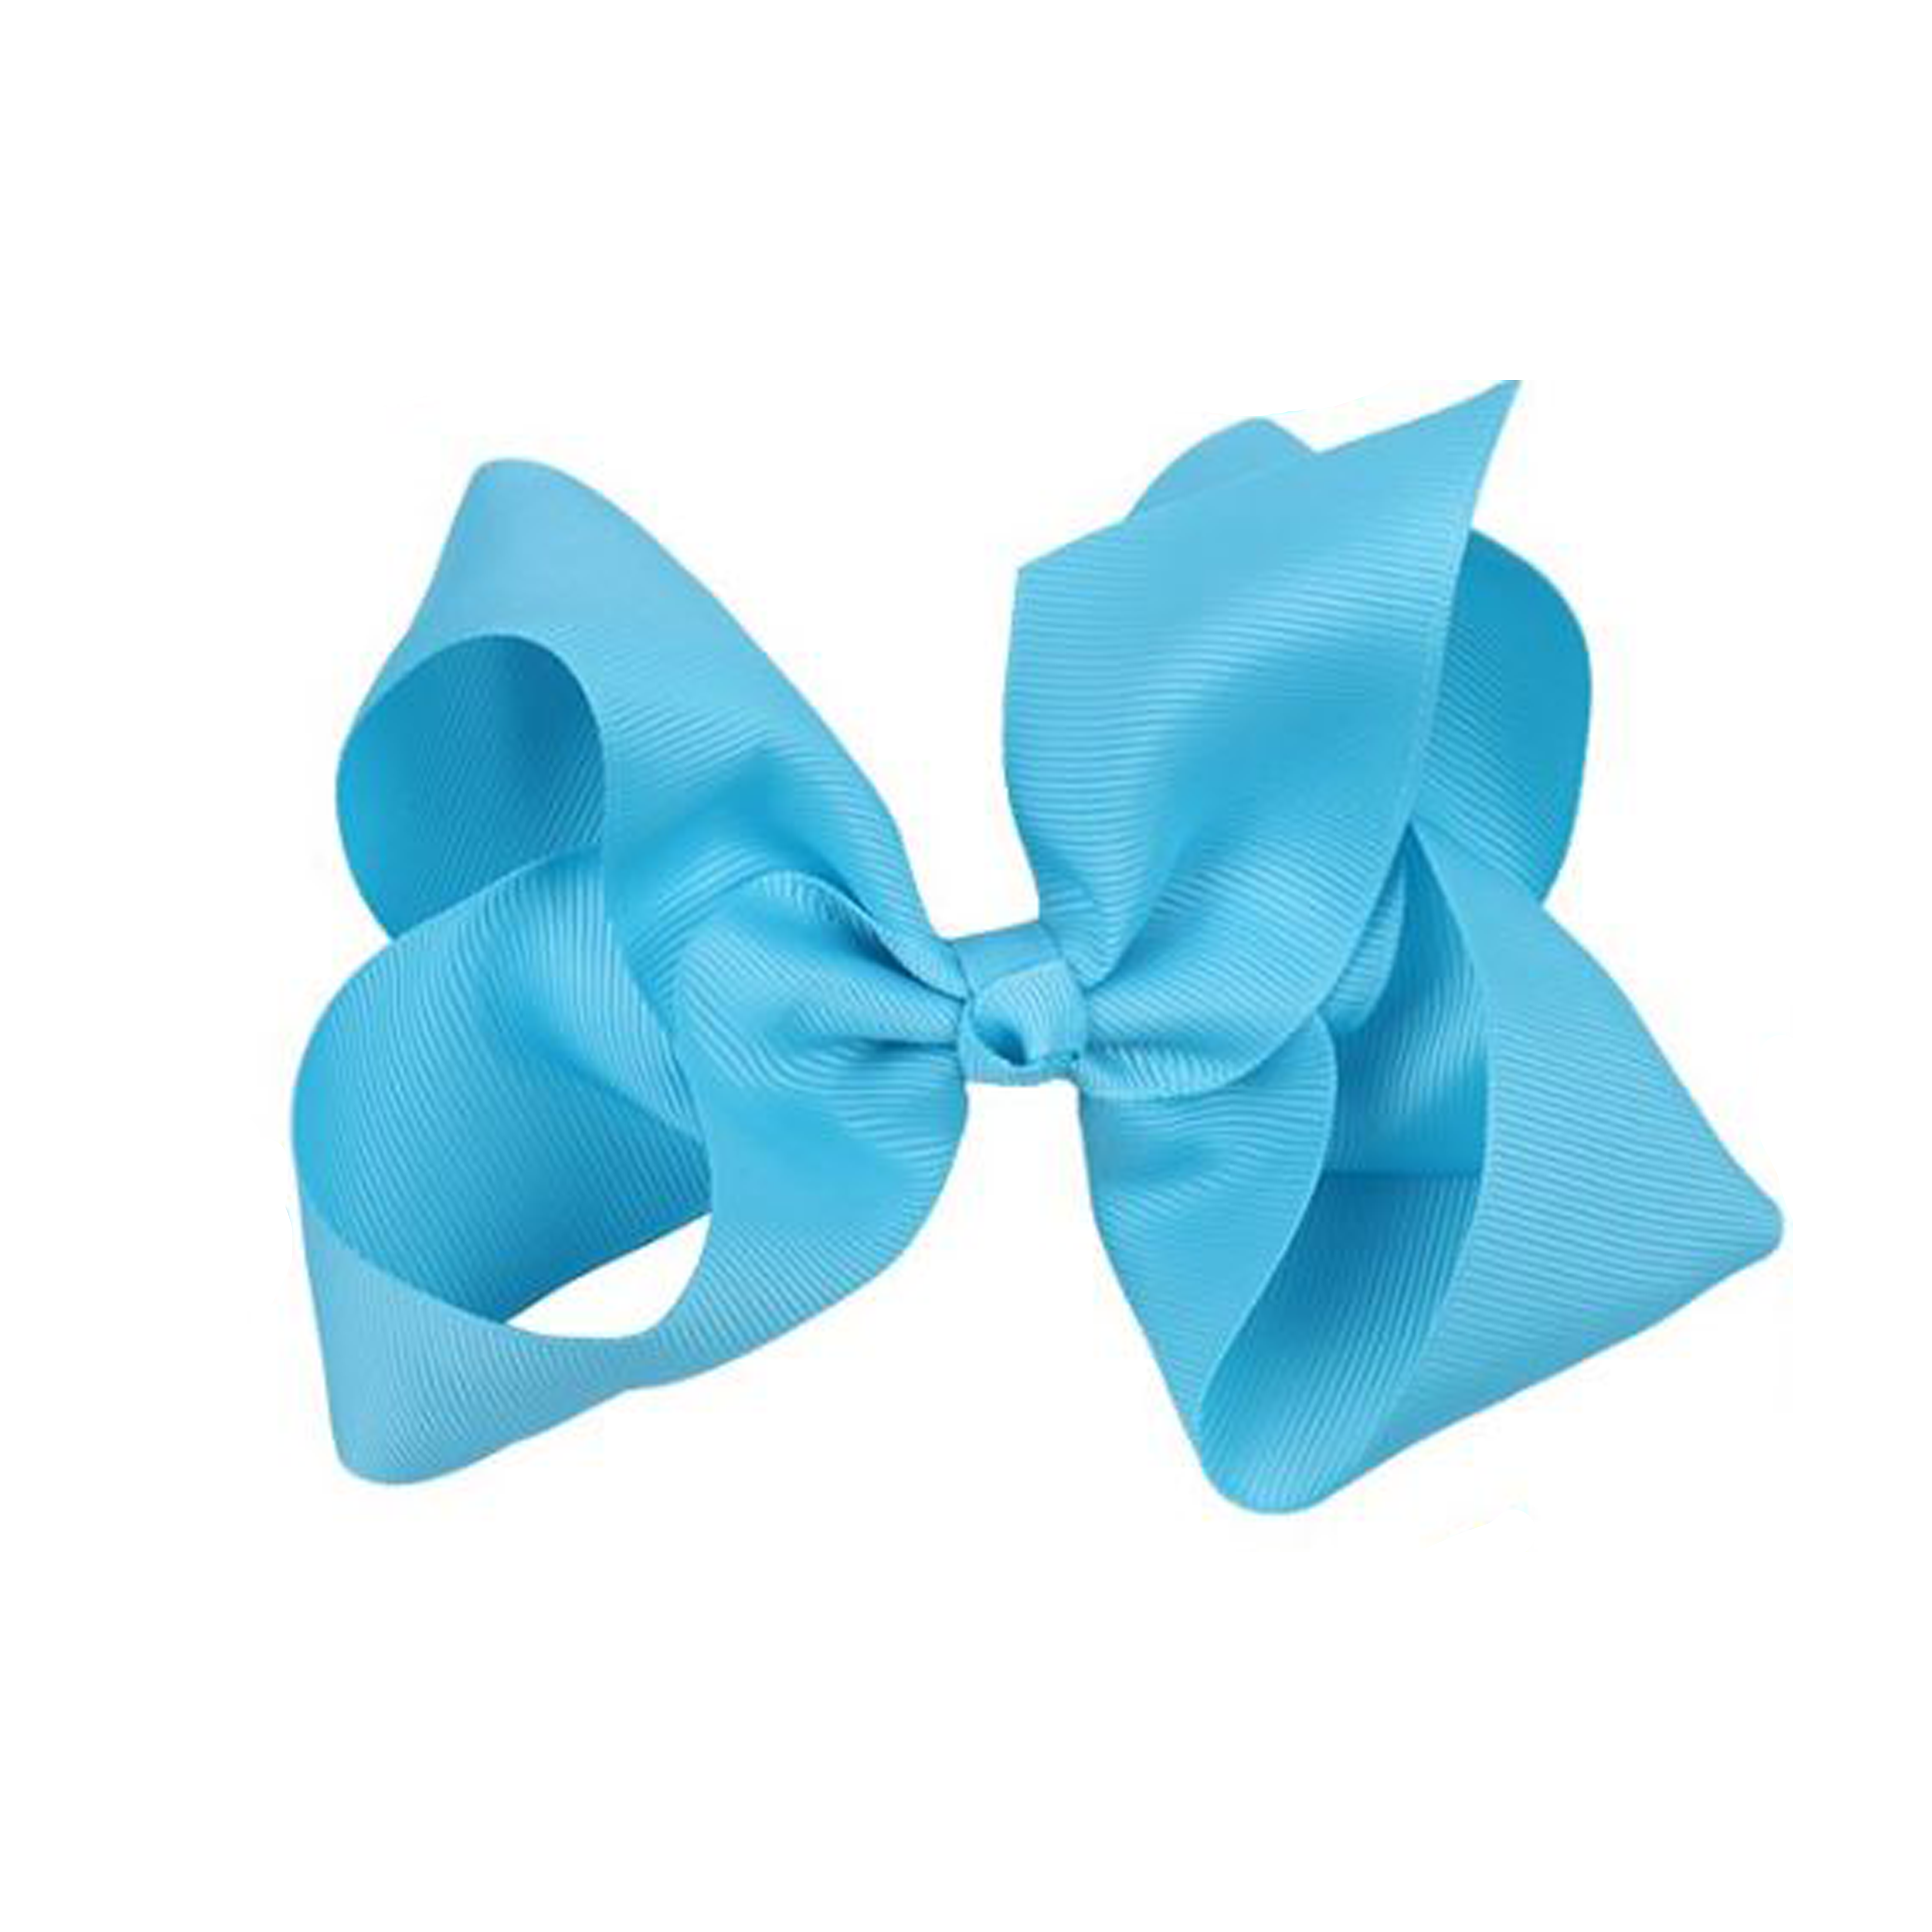 Victory Bows Large 7 Light Blue Hair Bow made with 3 Grosgrain Ribbon-  The Anna-Made in USA Pony Tail Band XLB150